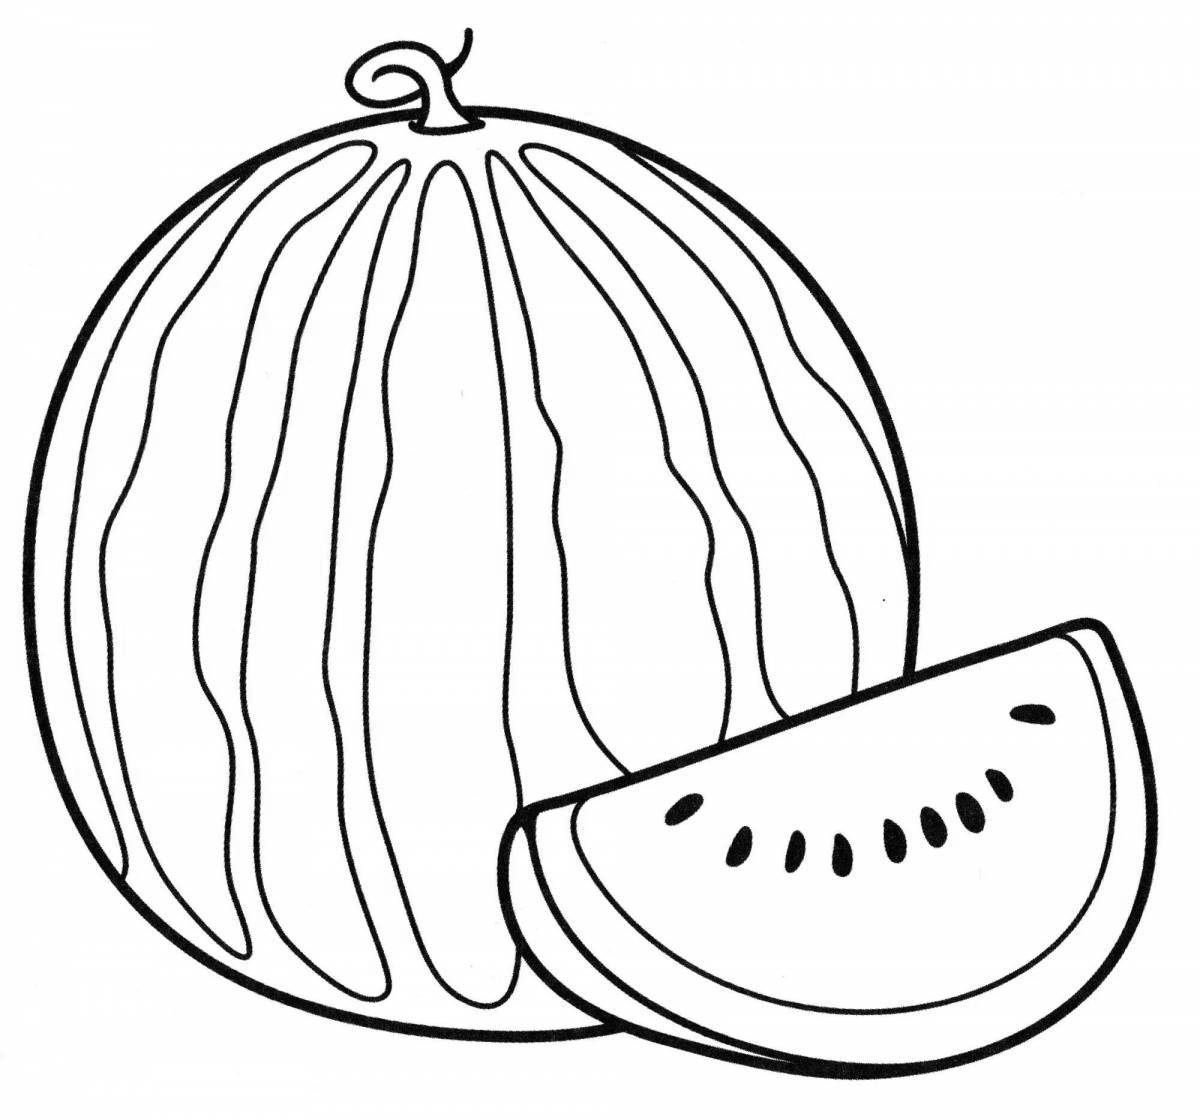 Colourful watermelon coloring book for kids